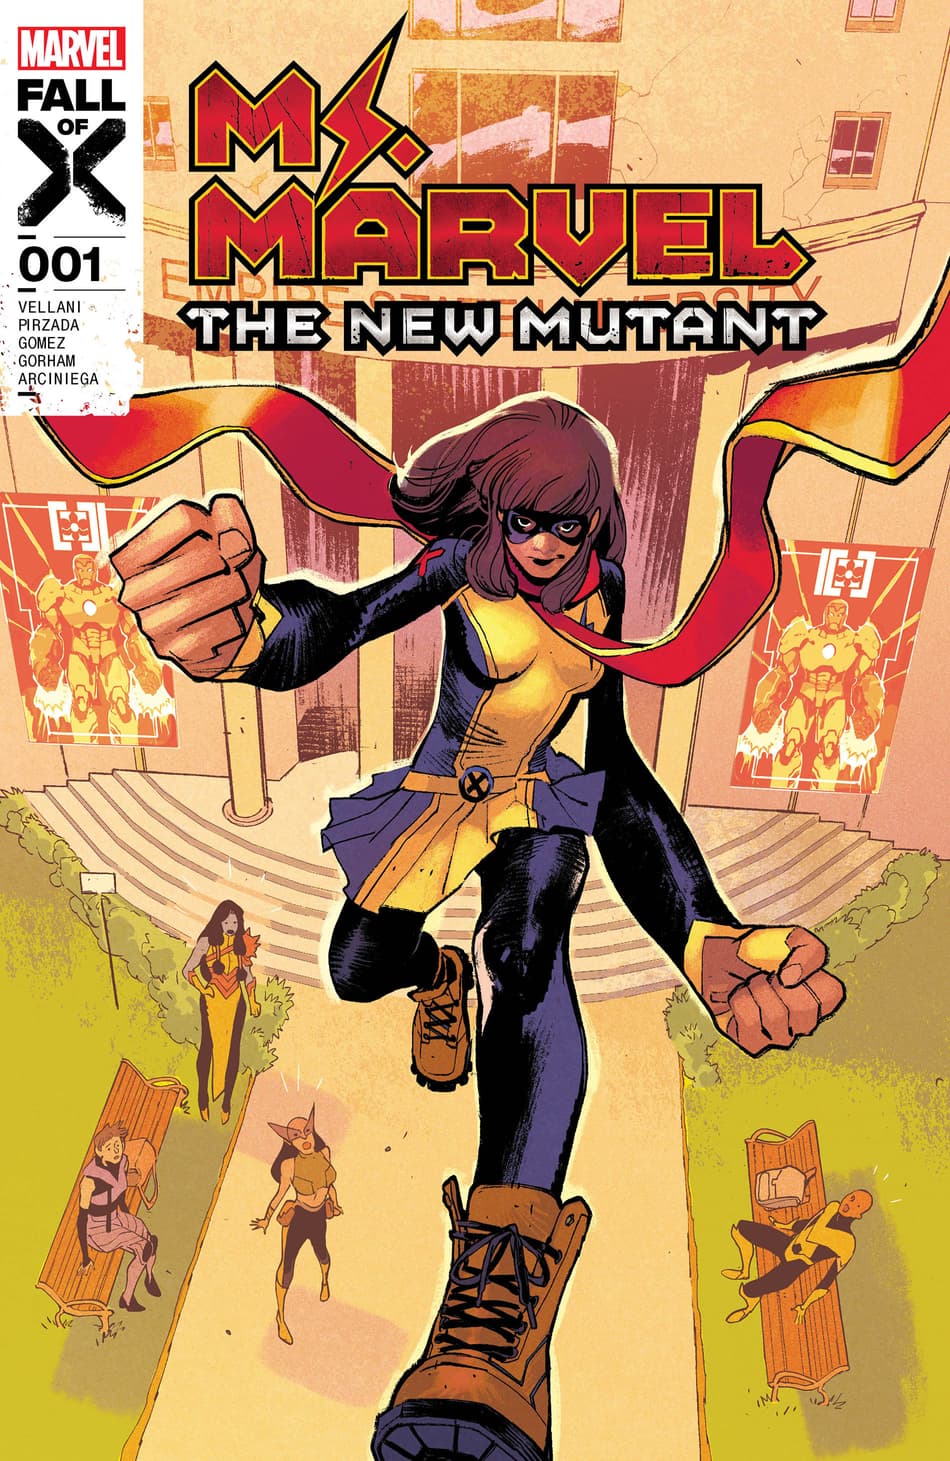 Cover to MS. MARVEL: THE NEW MUTANT #1 by Sara Pichelli.